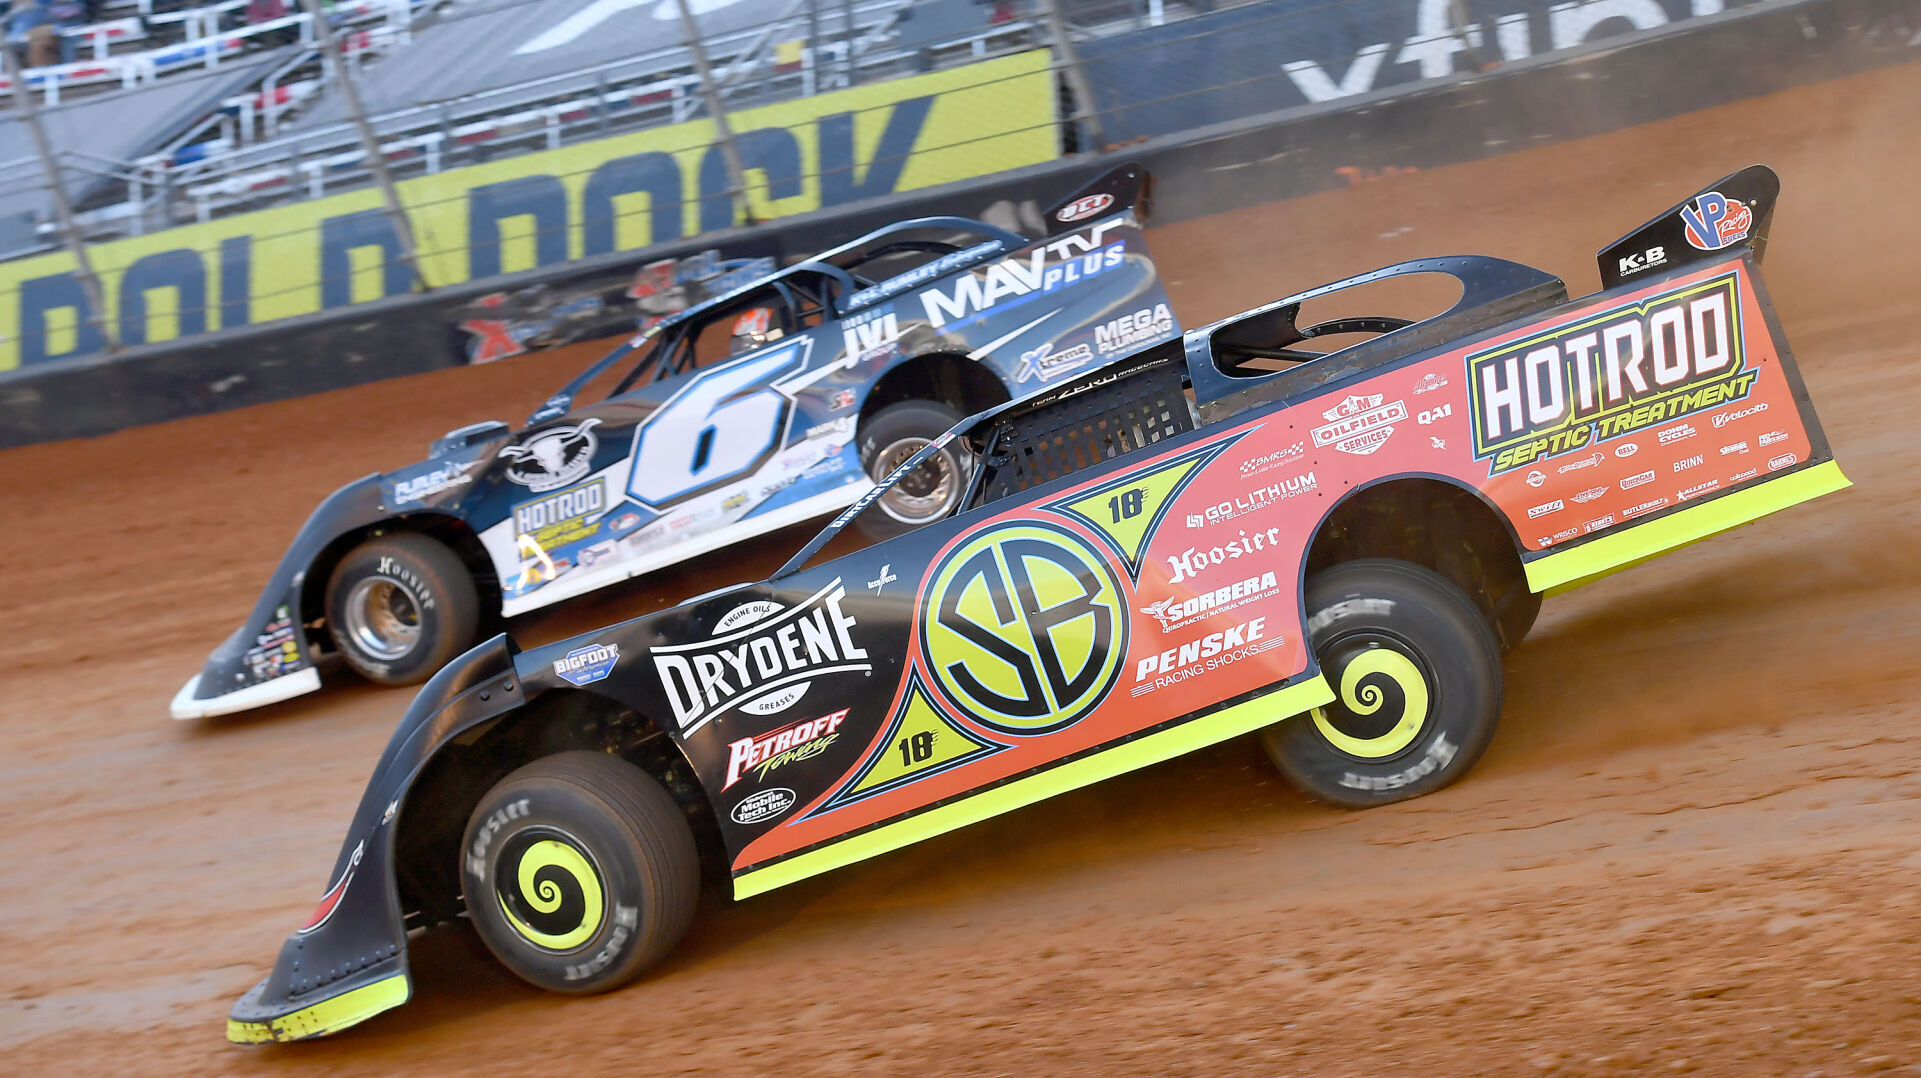 BRISTOL DIRT NATIONALS Monster event; Bloomquist brings decades of dirt experience and success to Bristol Dirt Nationals